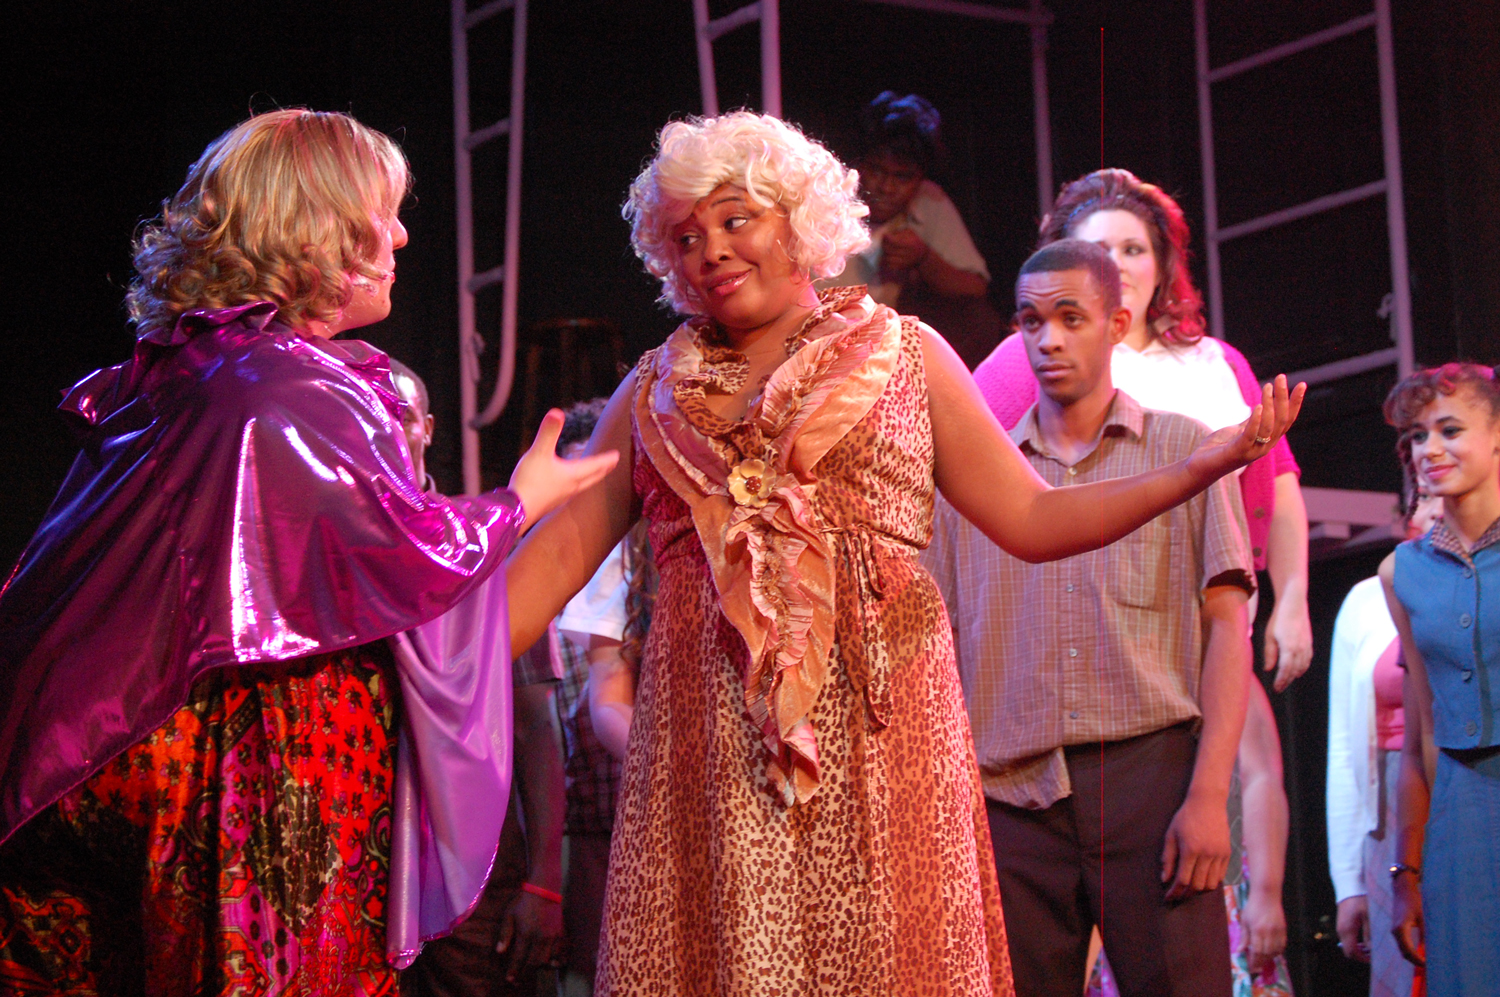 Not even Edna (Josh Fagundes) can convince Motormouth (Laniece Wilson) to extend 'Hairspray' yet again, though it's been the Flagler Playhouse's most acclaimed show. Wardrobes aside, Fagundes and Wilson are an item off-stage. (© FlaglerLive)